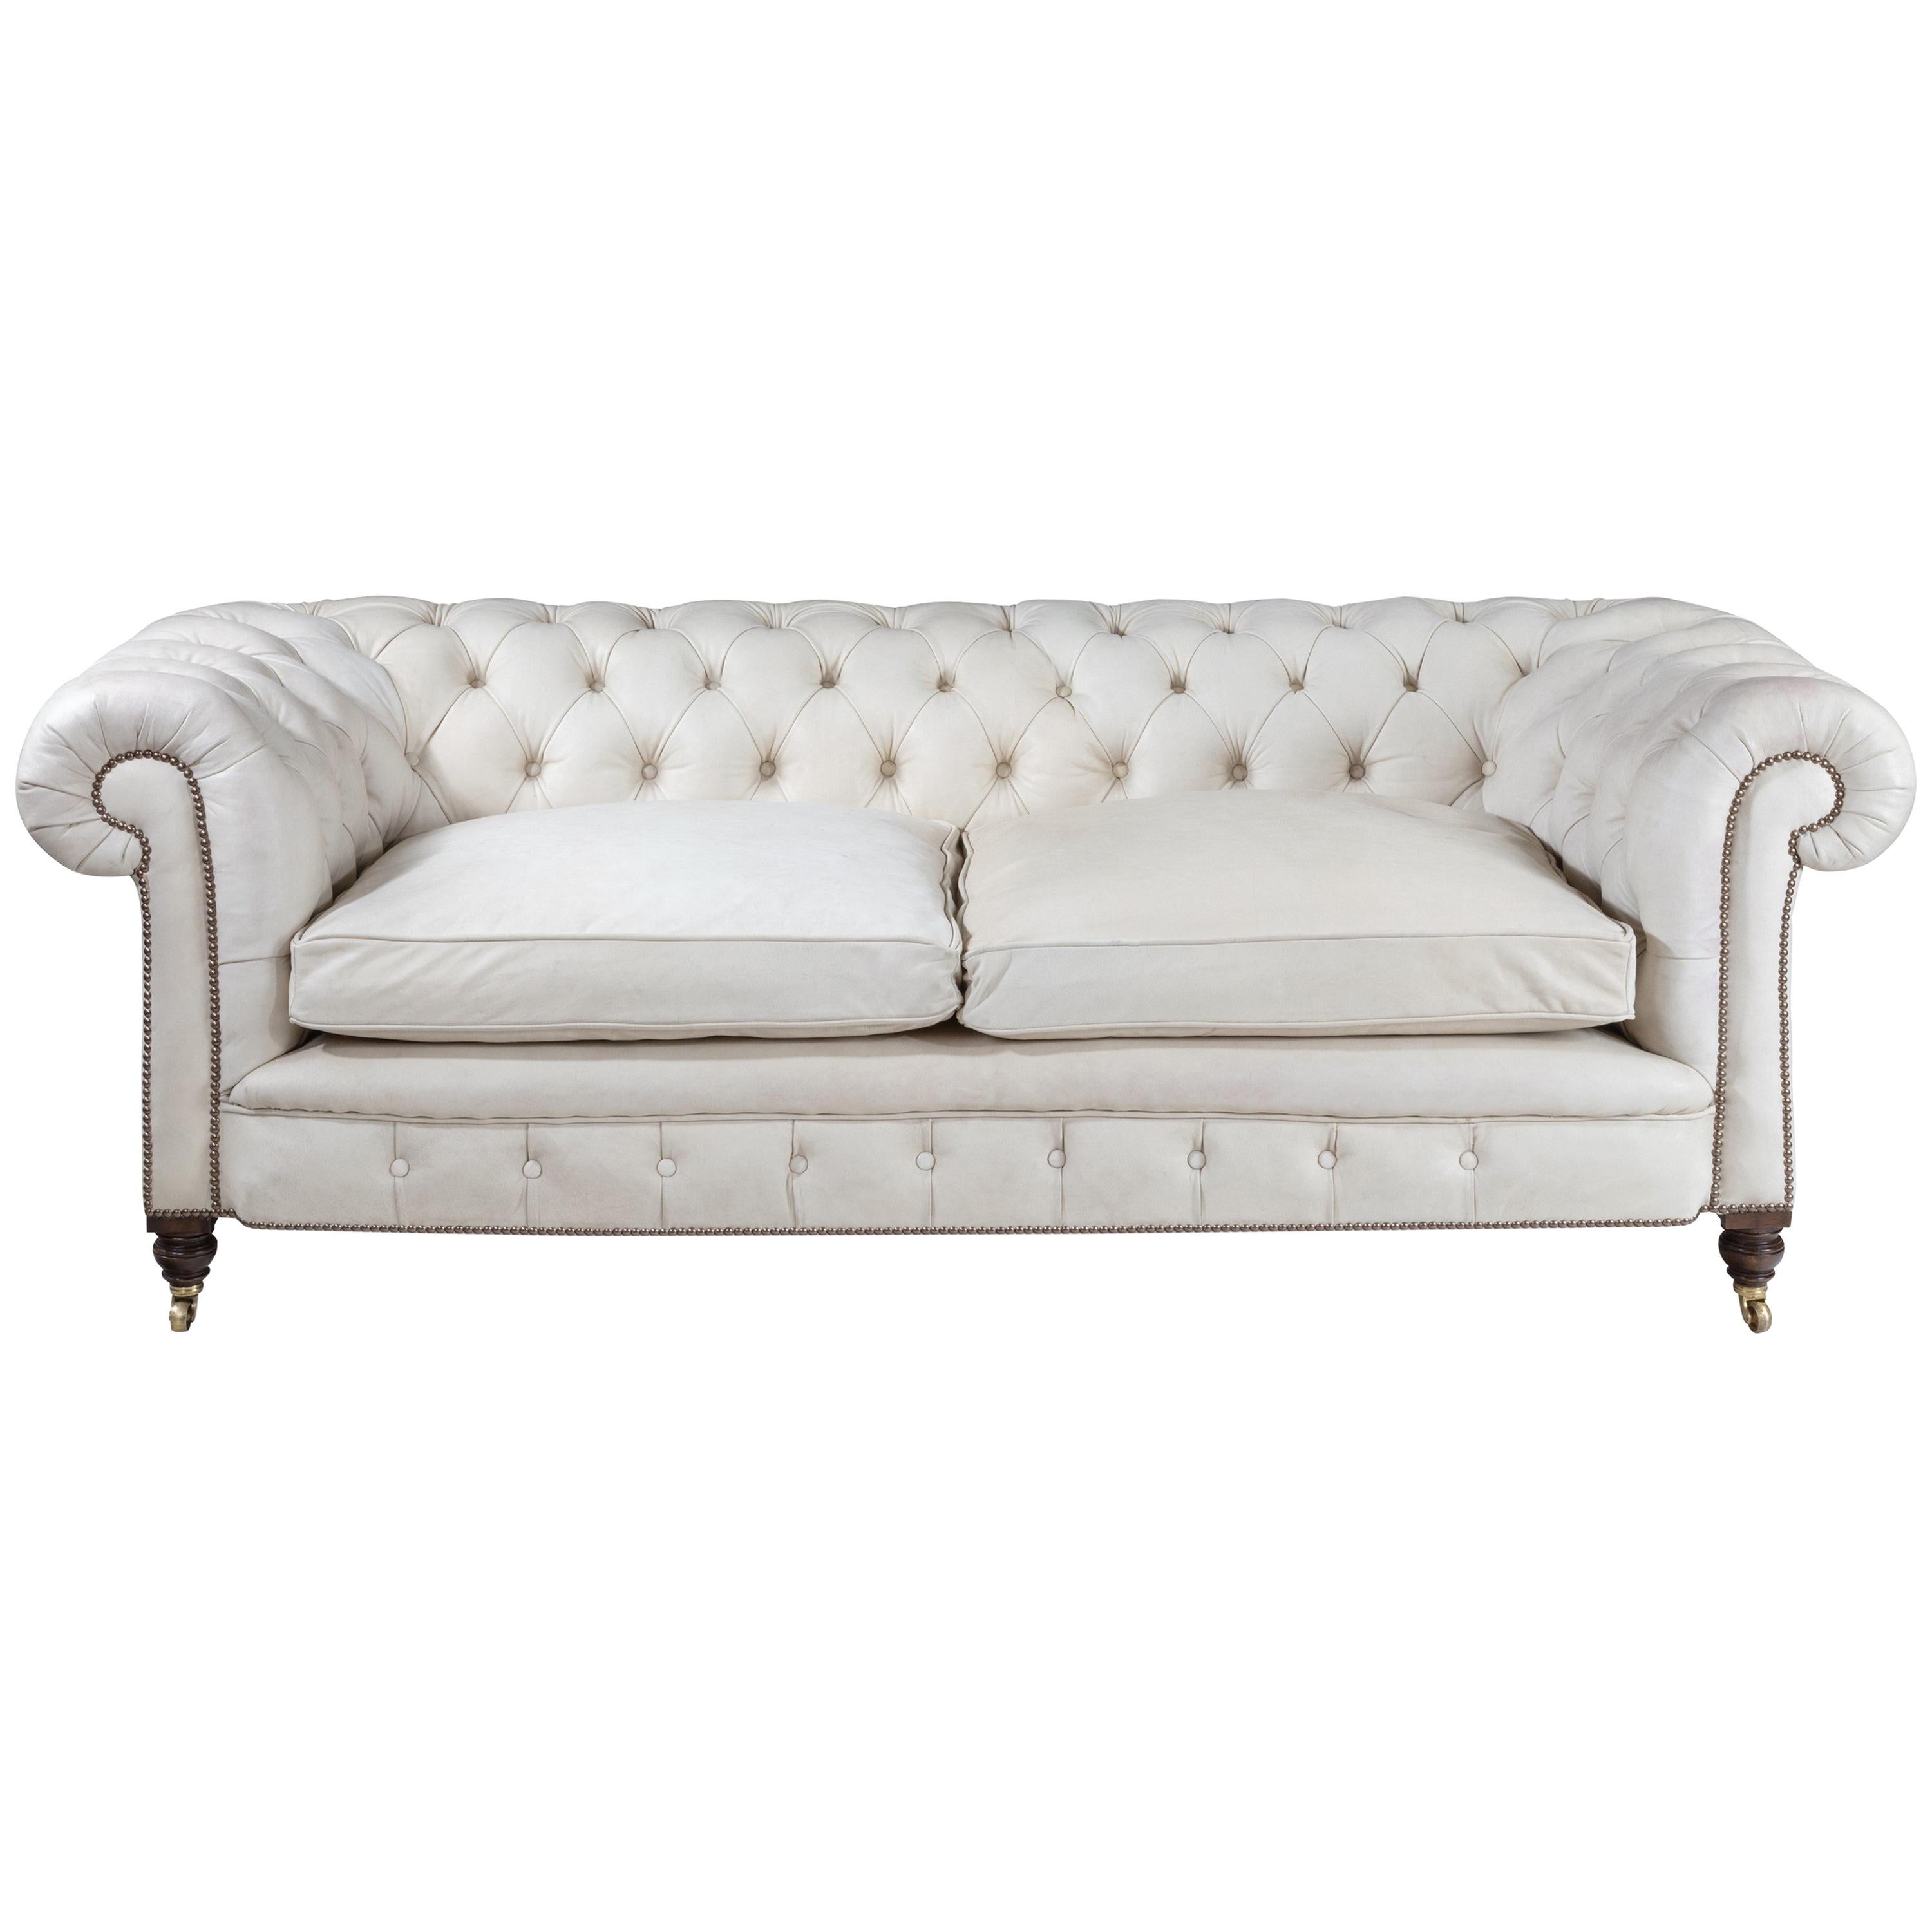 Late Victorian Two-Seat Chesterfield Sofa 'to Be Colored on Request', circa 1890